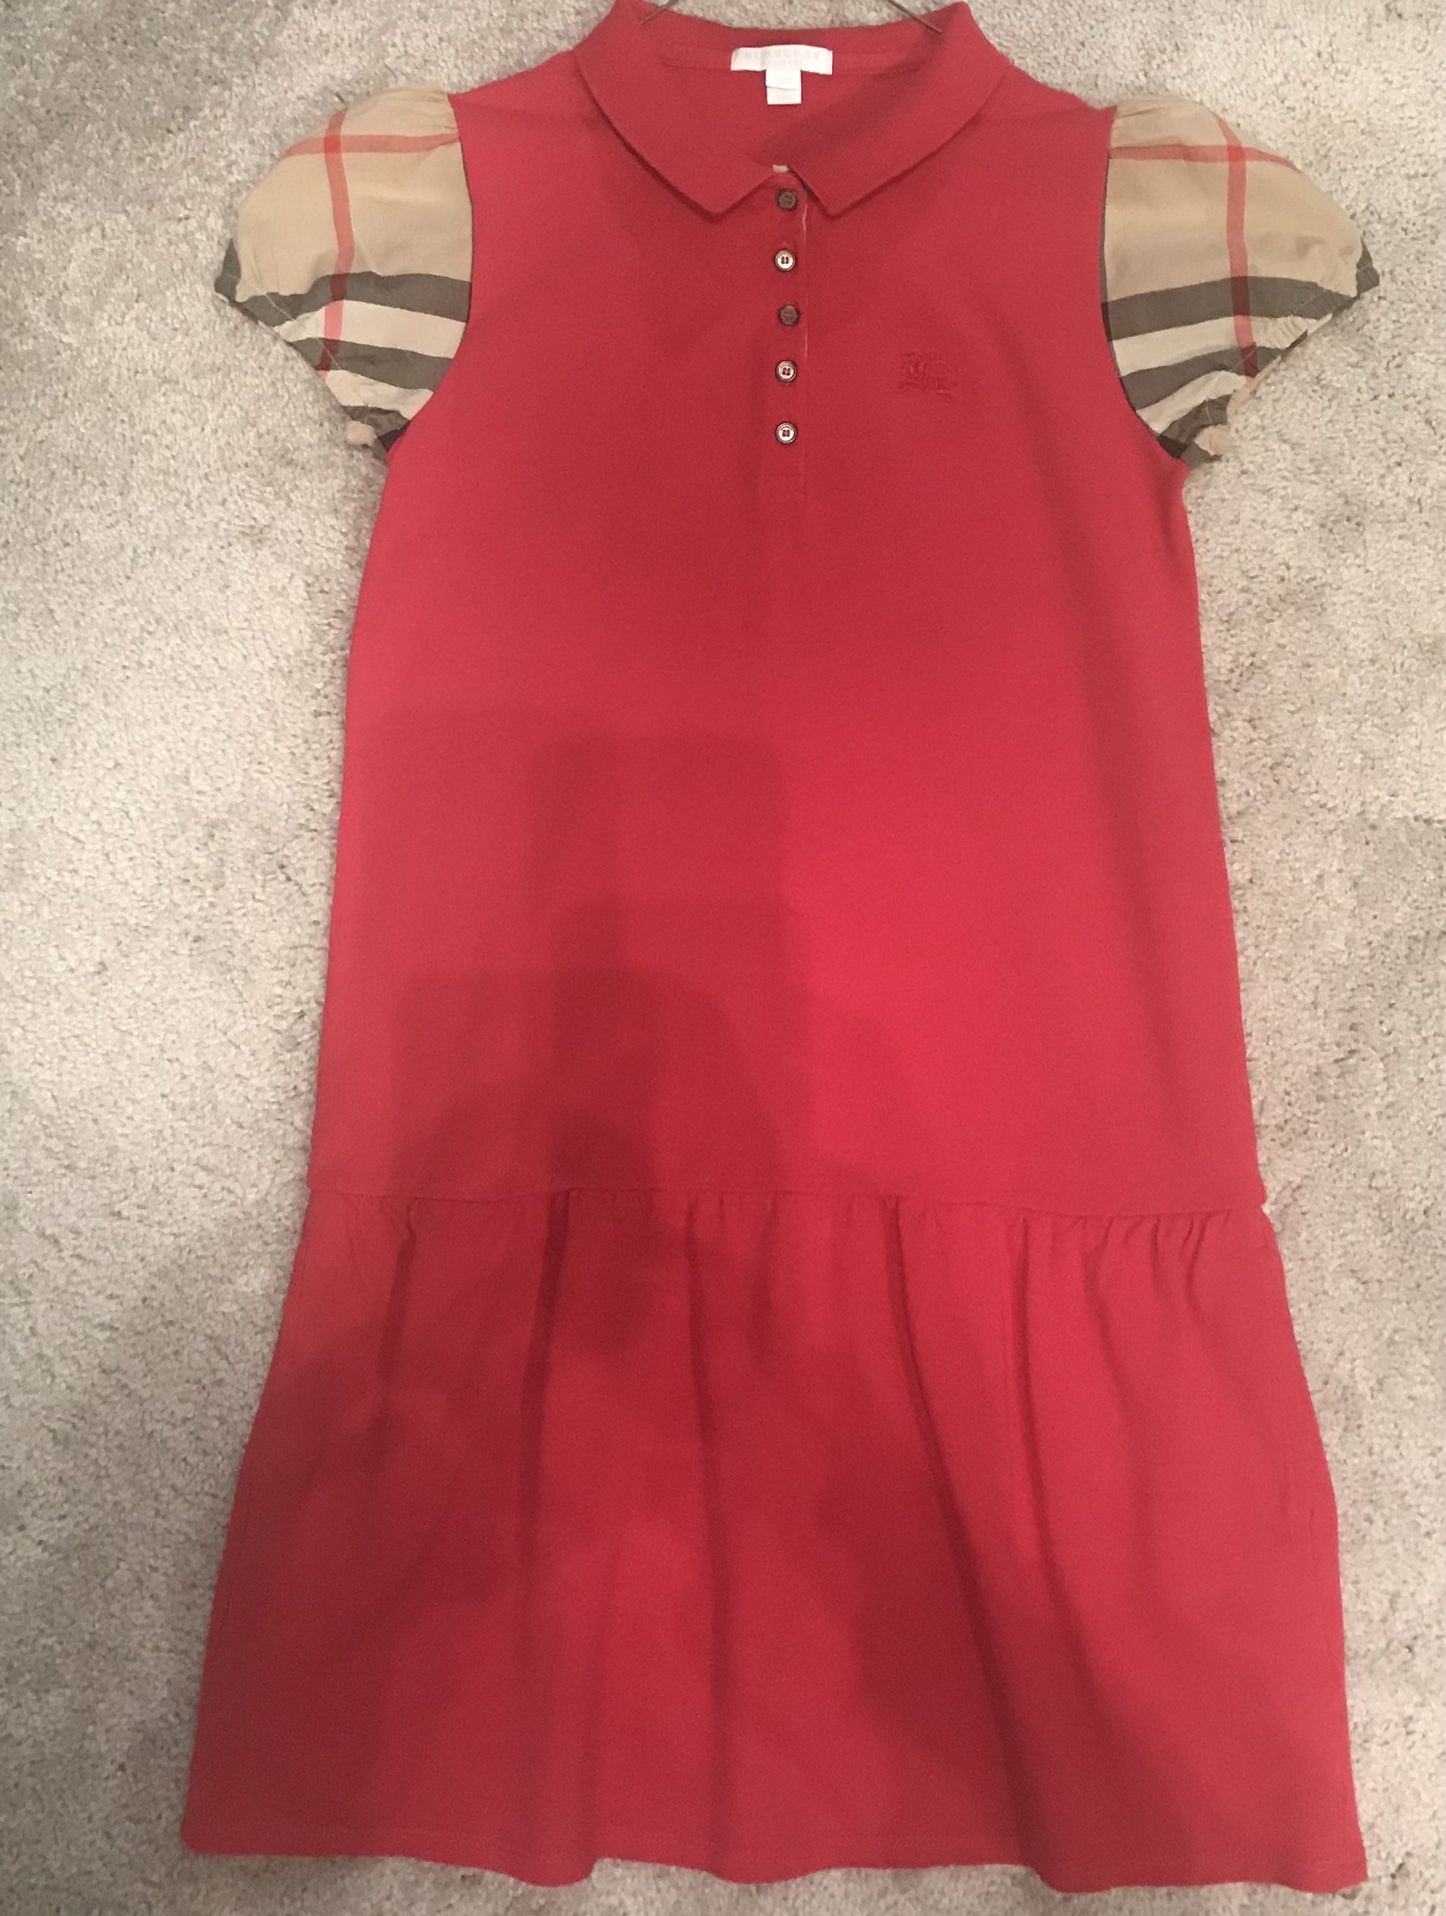 Pre-loved Burberry Youth Dress Size 14